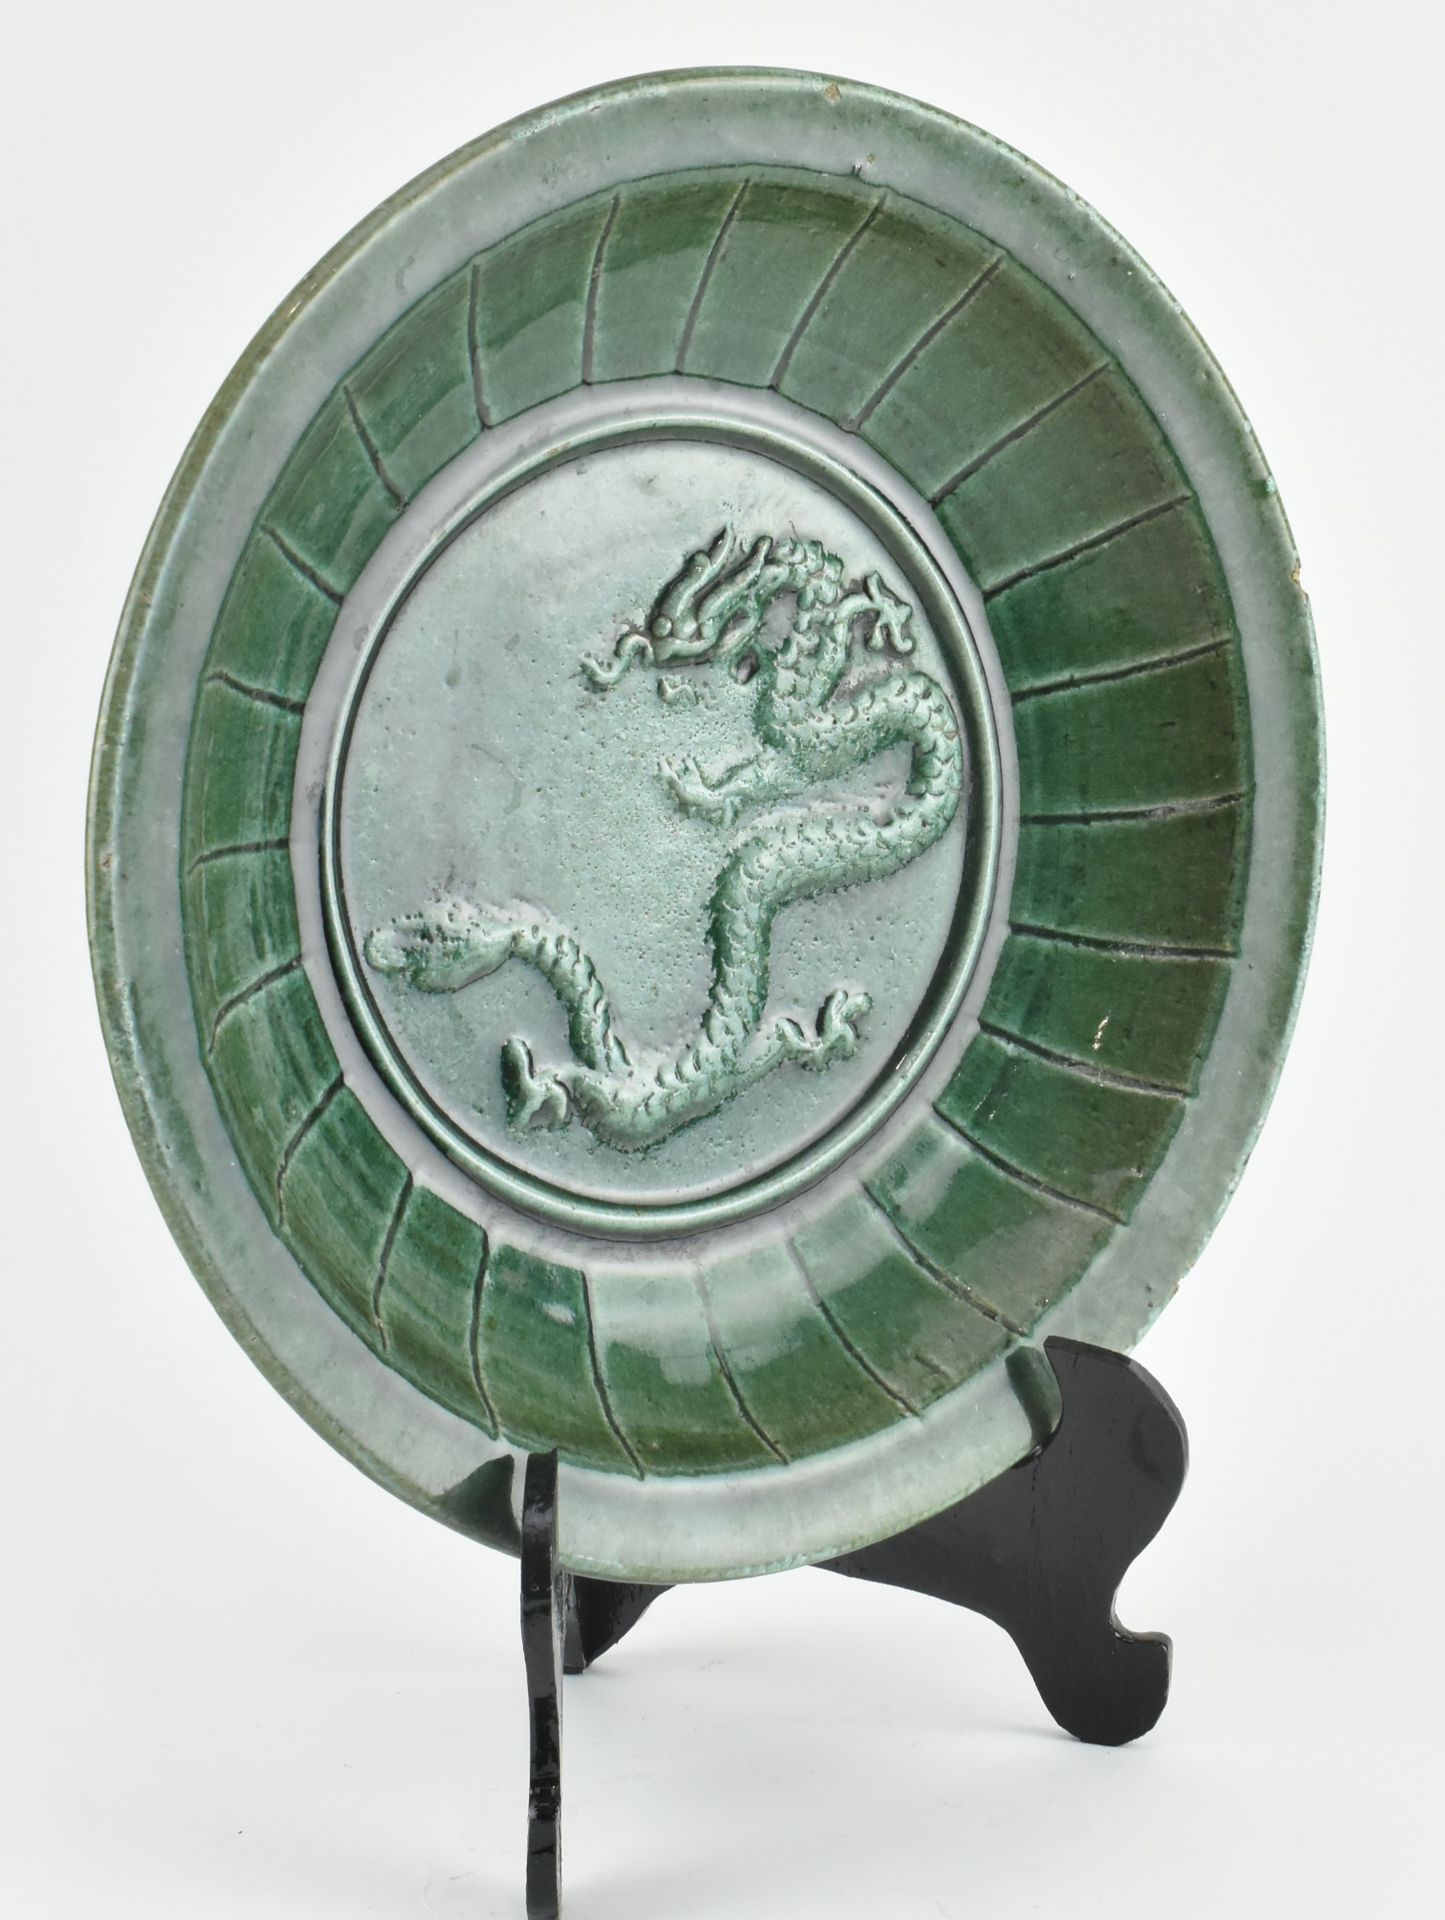 STONEWARE GREEN GLAZED "DRAGON" RELIEF CHARGER 绿釉三爪龙浮雕盘 - Image 3 of 6